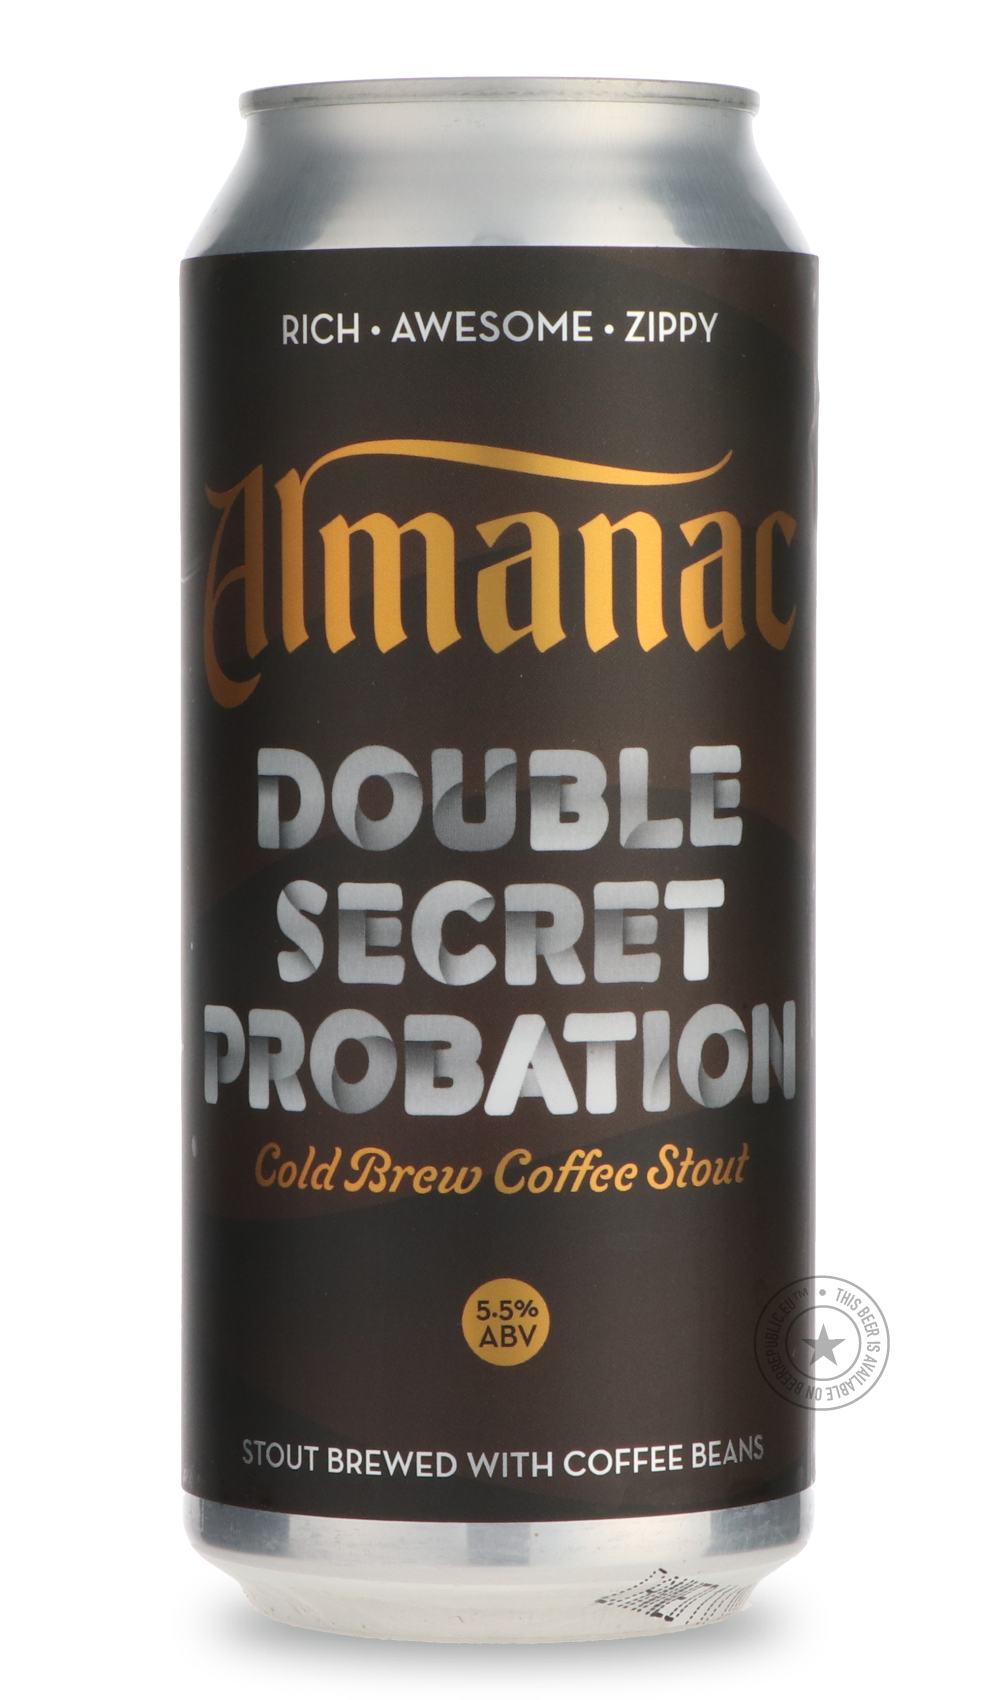 -Almanac- Double Secret Probation-Stout & Porter- Only @ Beer Republic - The best online beer store for American & Canadian craft beer - Buy beer online from the USA and Canada - Bier online kopen - Amerikaans bier kopen - Craft beer store - Craft beer kopen - Amerikanisch bier kaufen - Bier online kaufen - Acheter biere online - IPA - Stout - Porter - New England IPA - Hazy IPA - Imperial Stout - Barrel Aged - Barrel Aged Imperial Stout - Brown - Dark beer - Blond - Blonde - Pilsner - Lager - Wheat - Weize